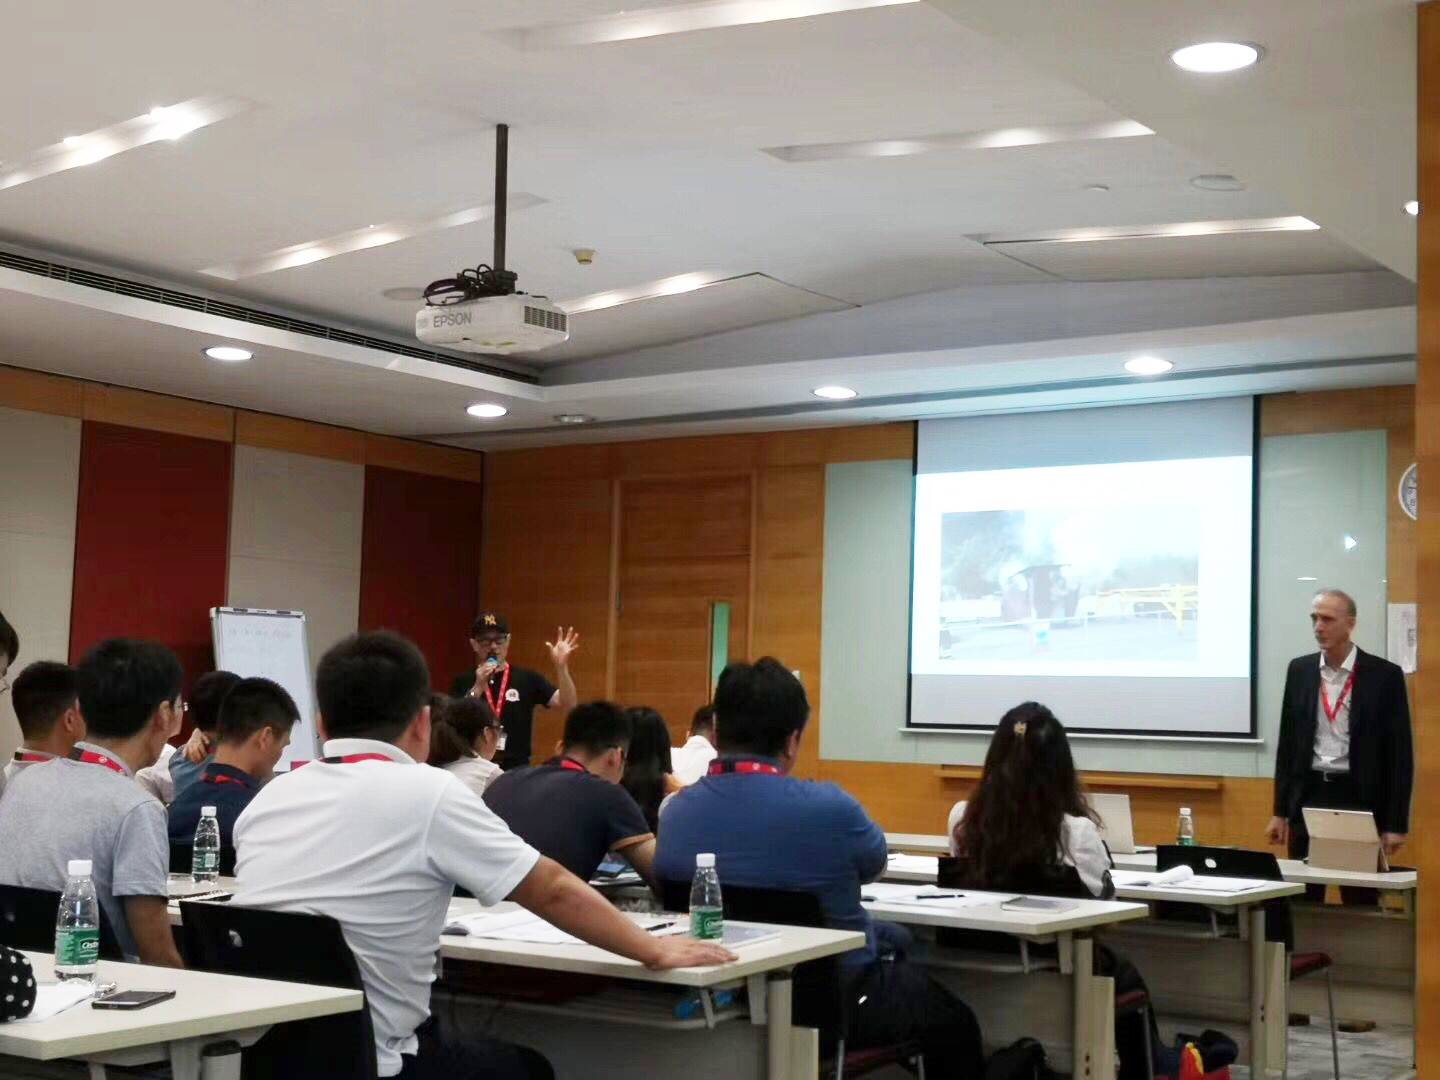 D&D Team participated in the DHI Seminar on Architectural Hardware